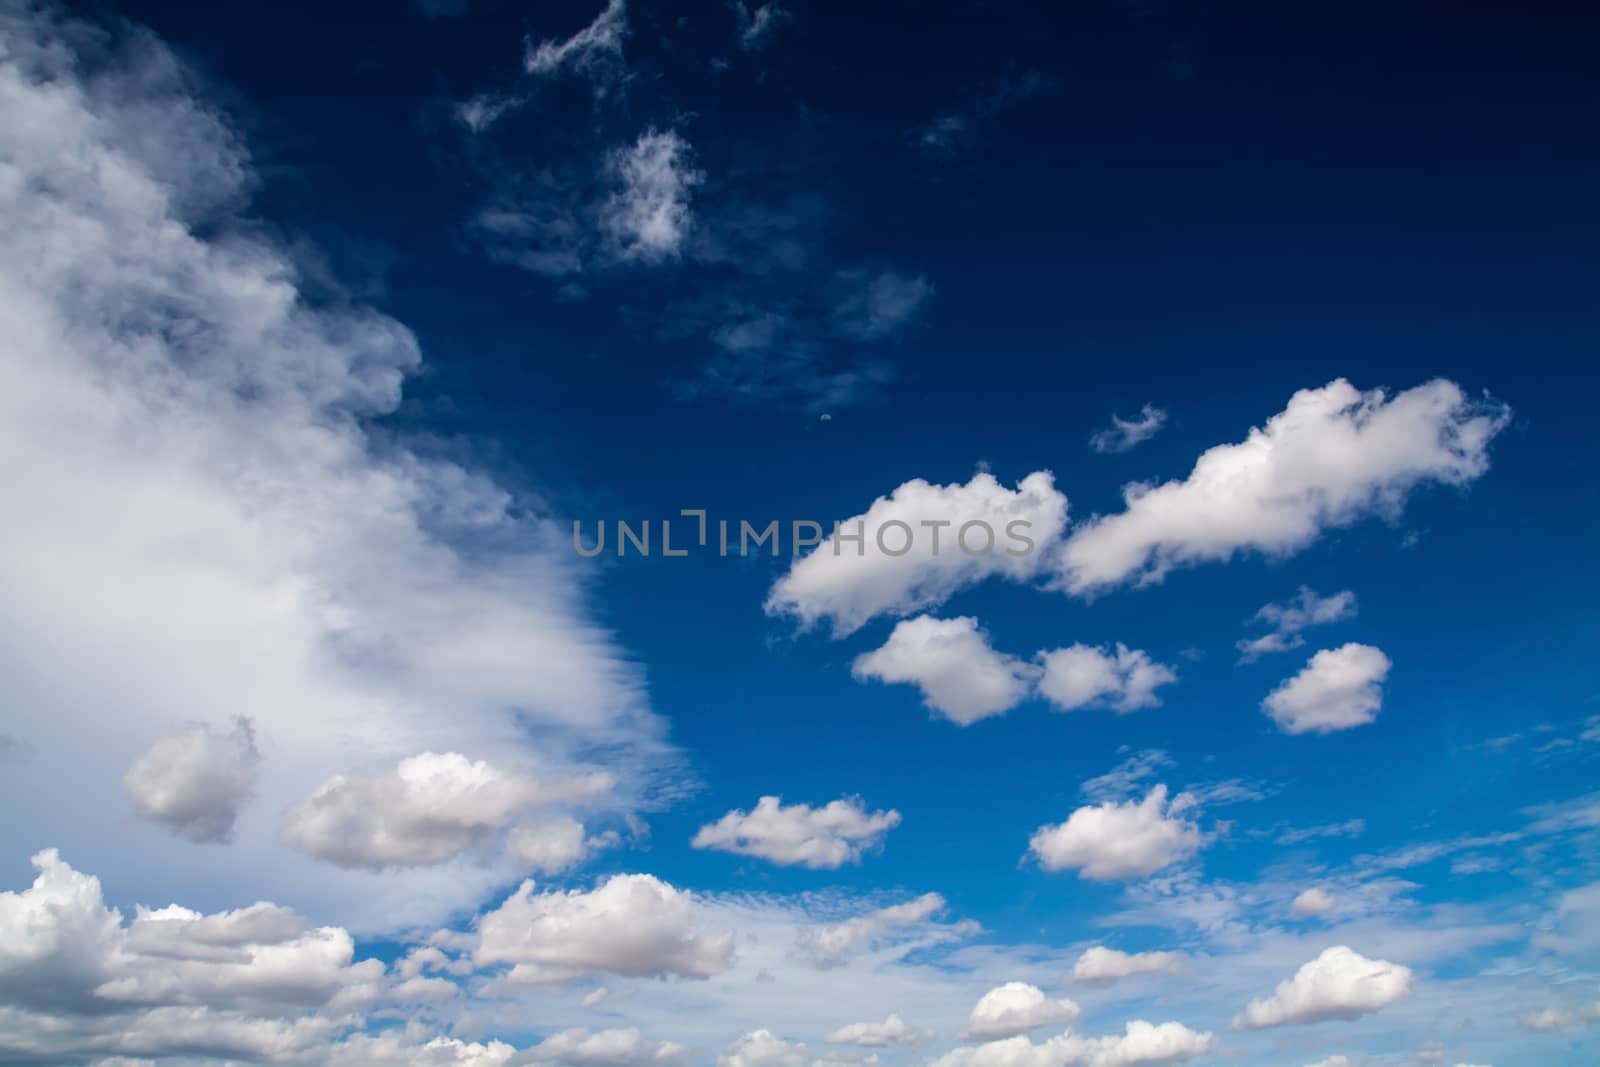 One of the images in a photo series depicting the grandeur of various cloud formations in the sky